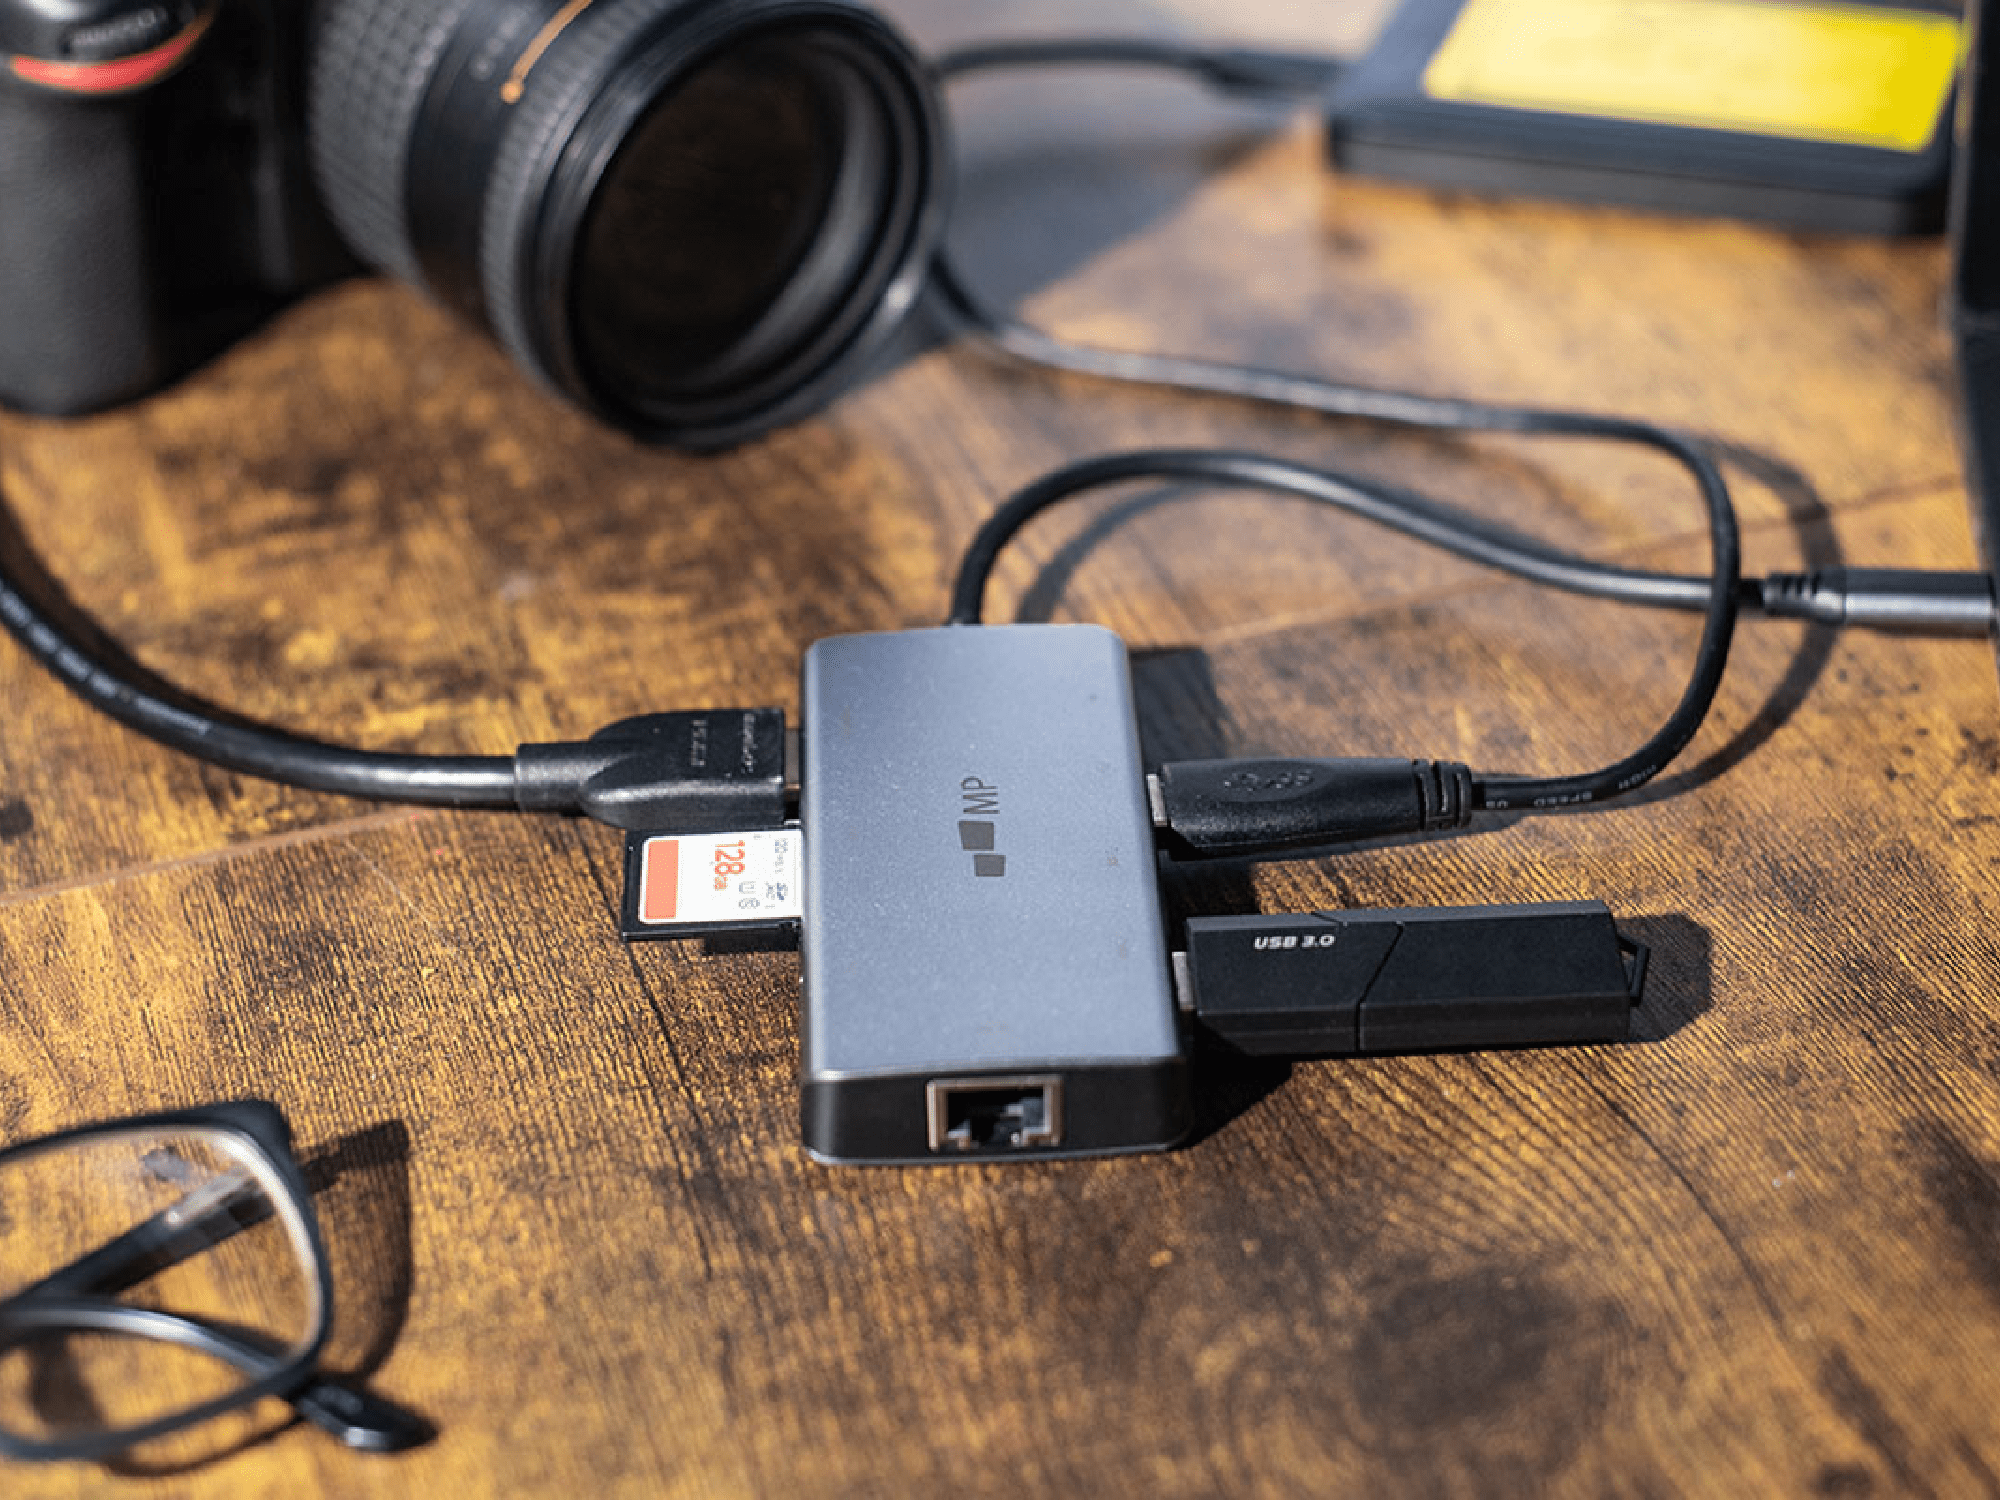 Turn your laptop's USB-C port into 4K HDMI, SD, USB and more with this hub